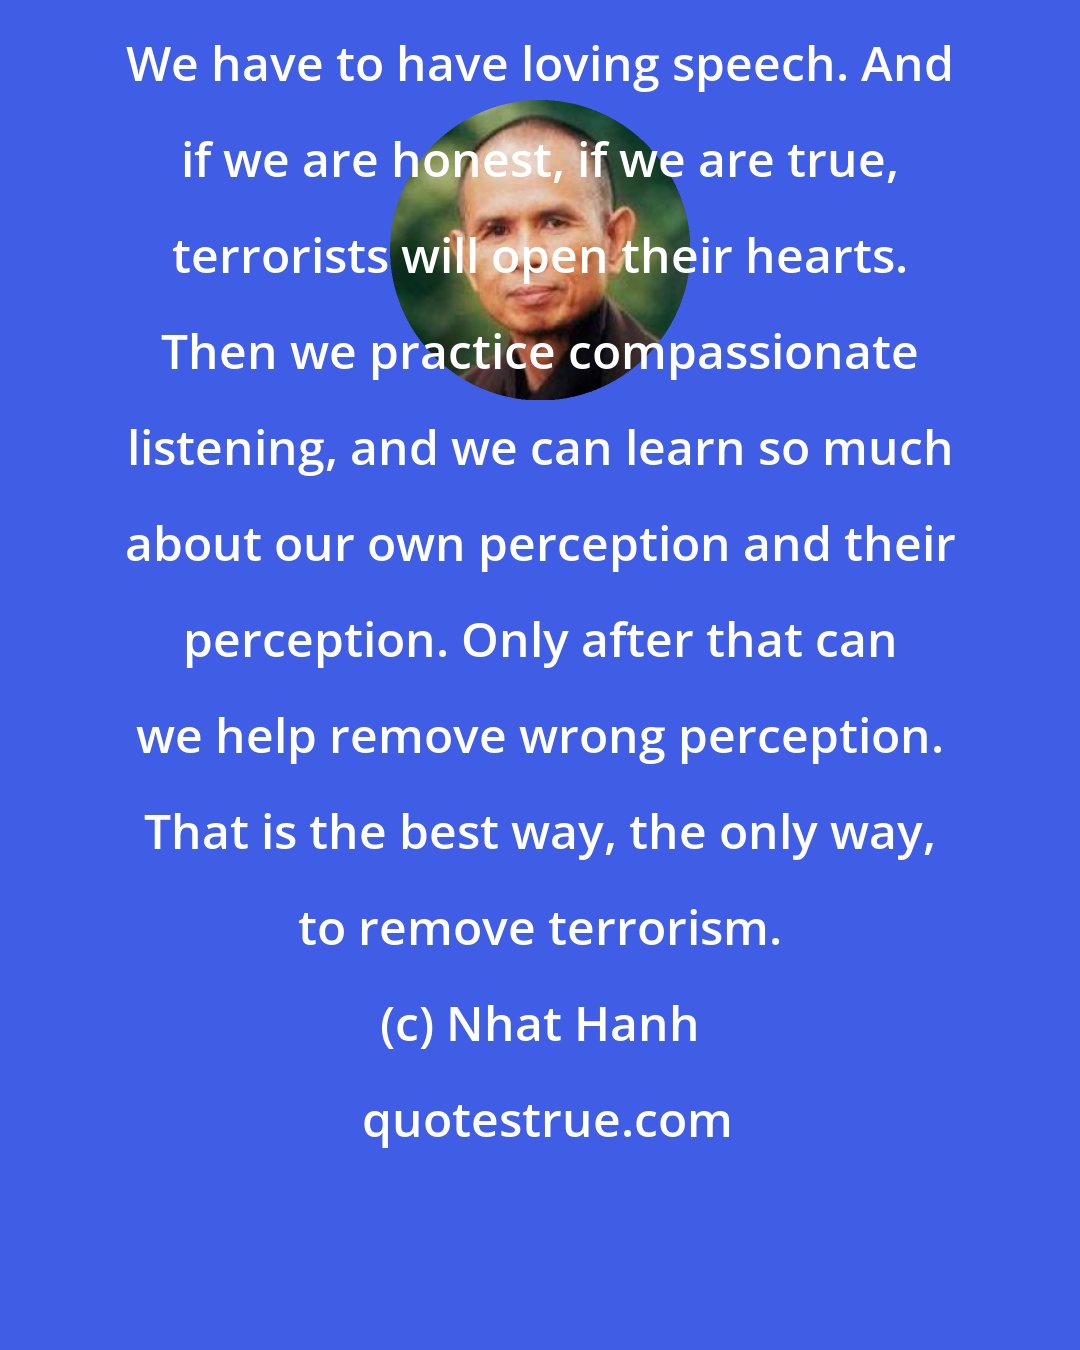 Nhat Hanh: We have to have loving speech. And if we are honest, if we are true, terrorists will open their hearts. Then we practice compassionate listening, and we can learn so much about our own perception and their perception. Only after that can we help remove wrong perception. That is the best way, the only way, to remove terrorism.